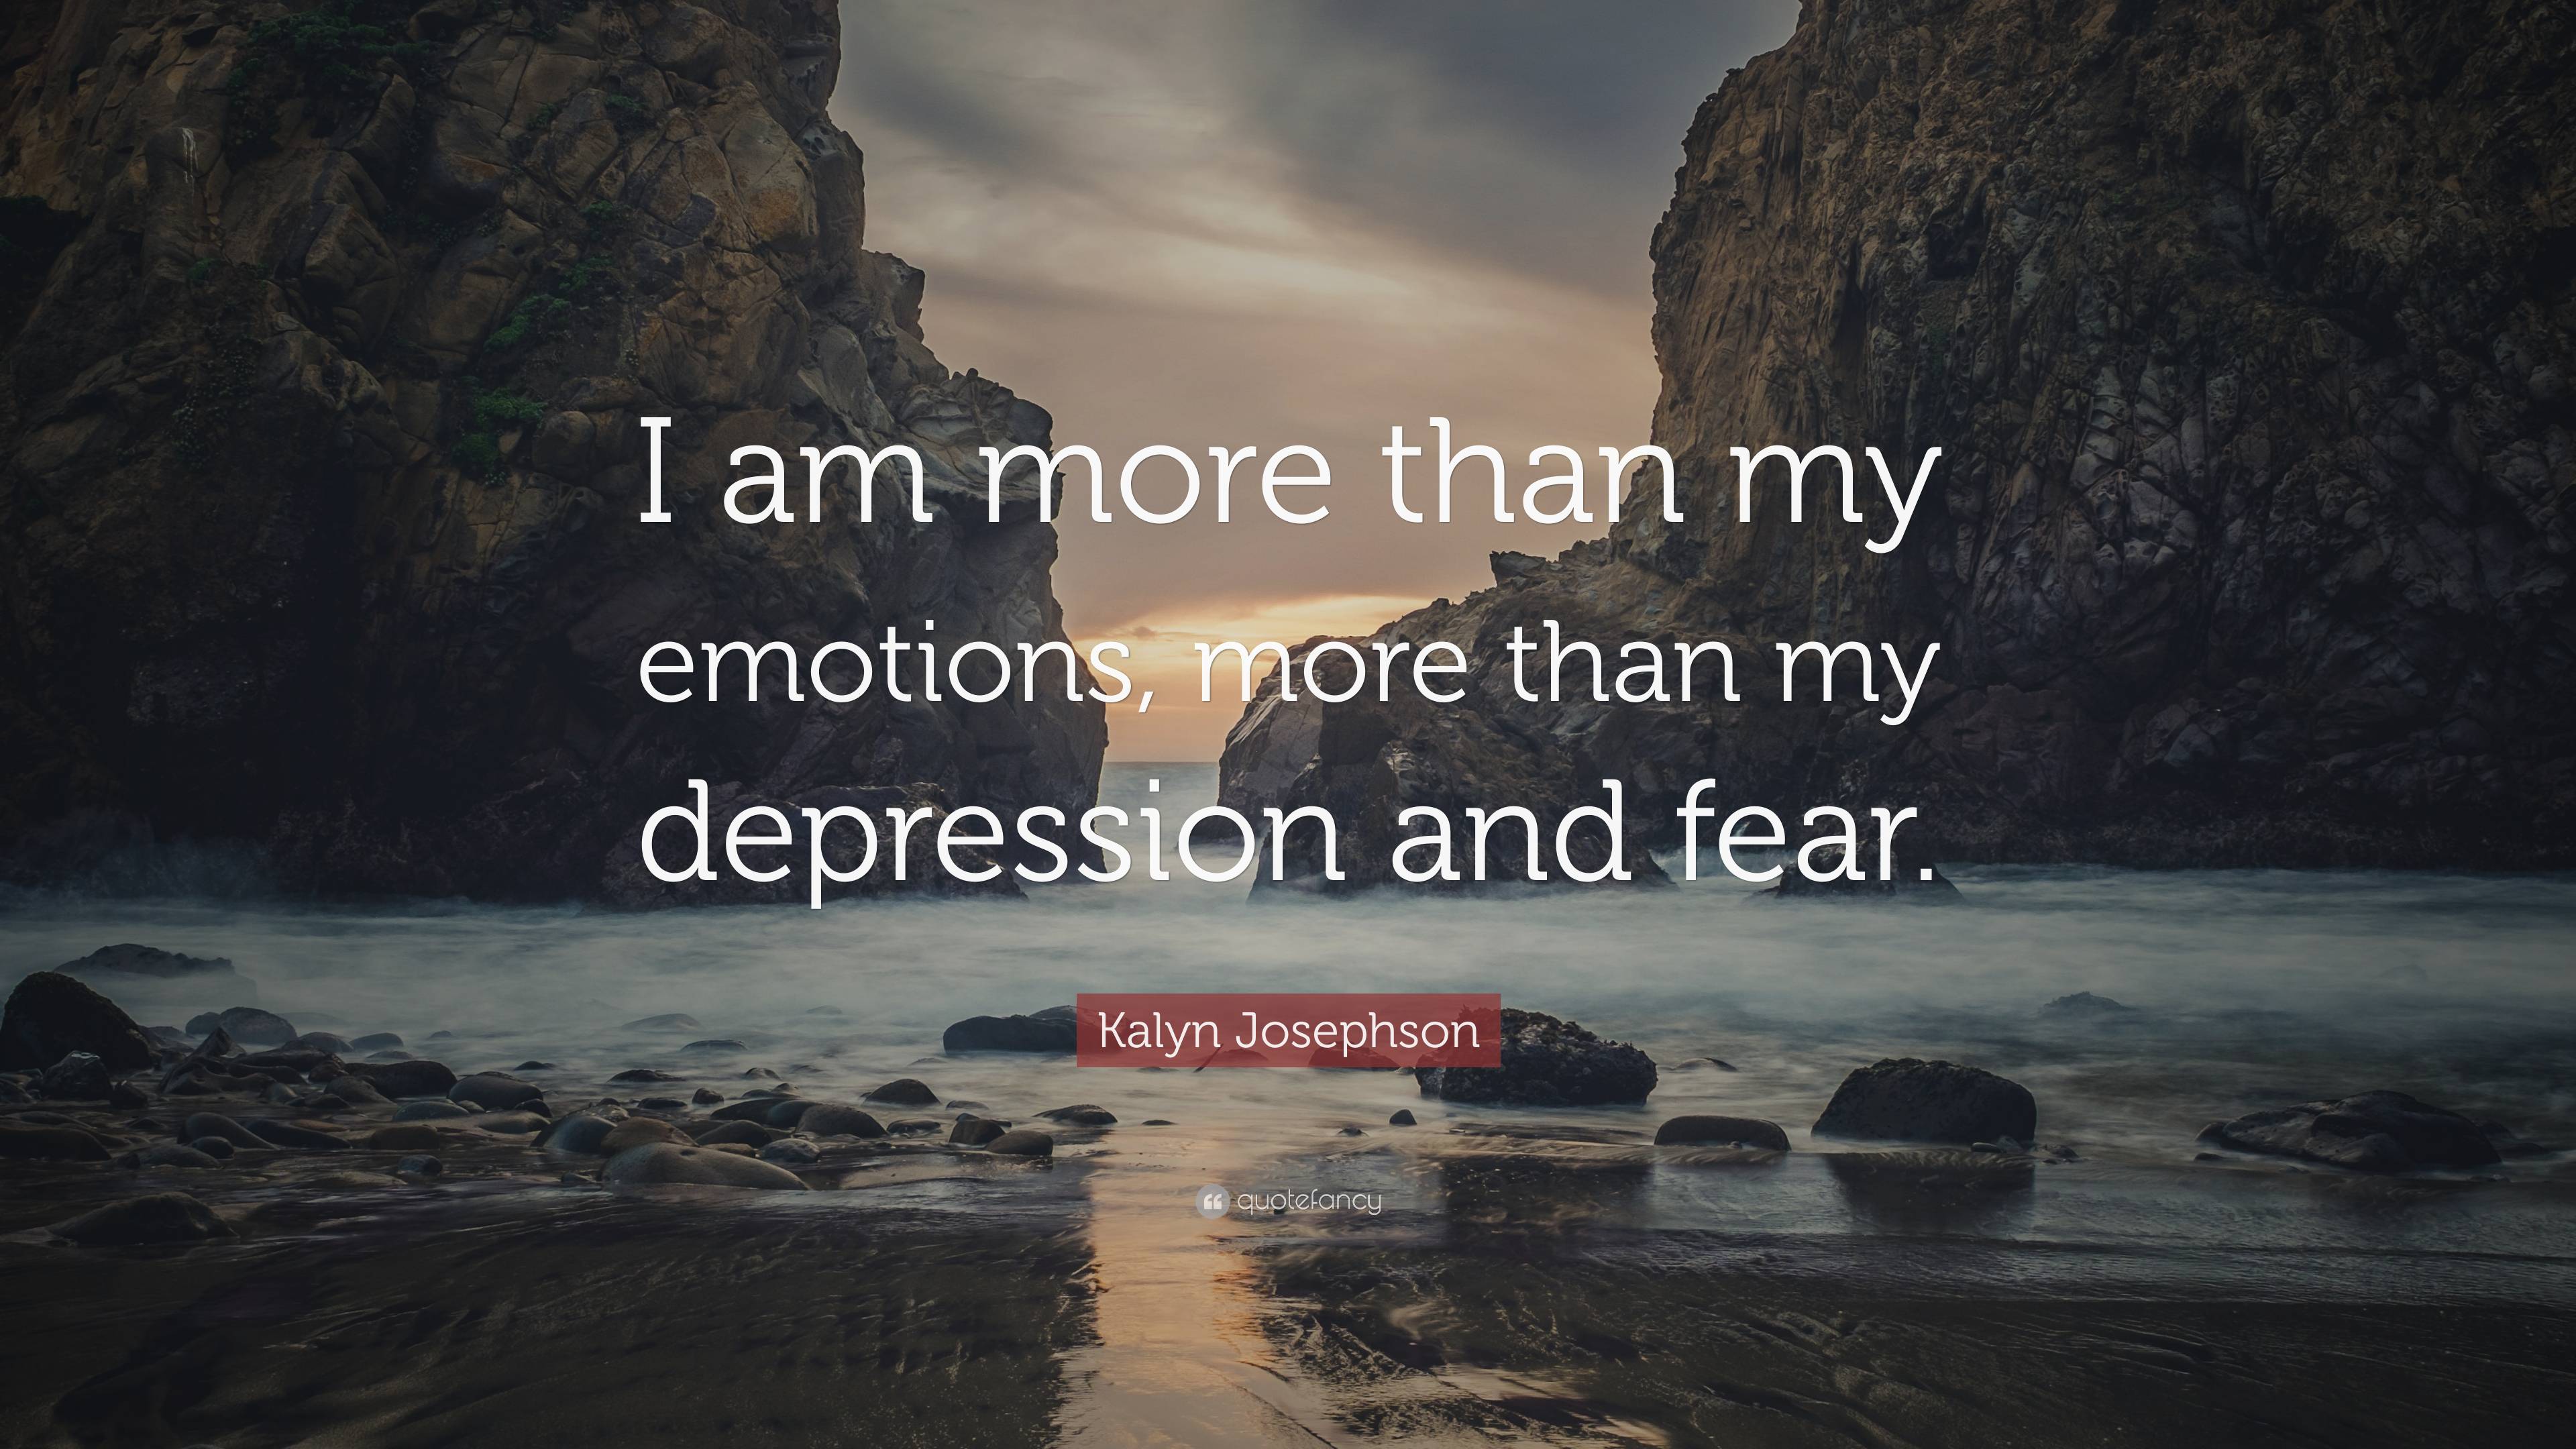 Kalyn Josephson Quote: “I am more than my emotions, more than my ...